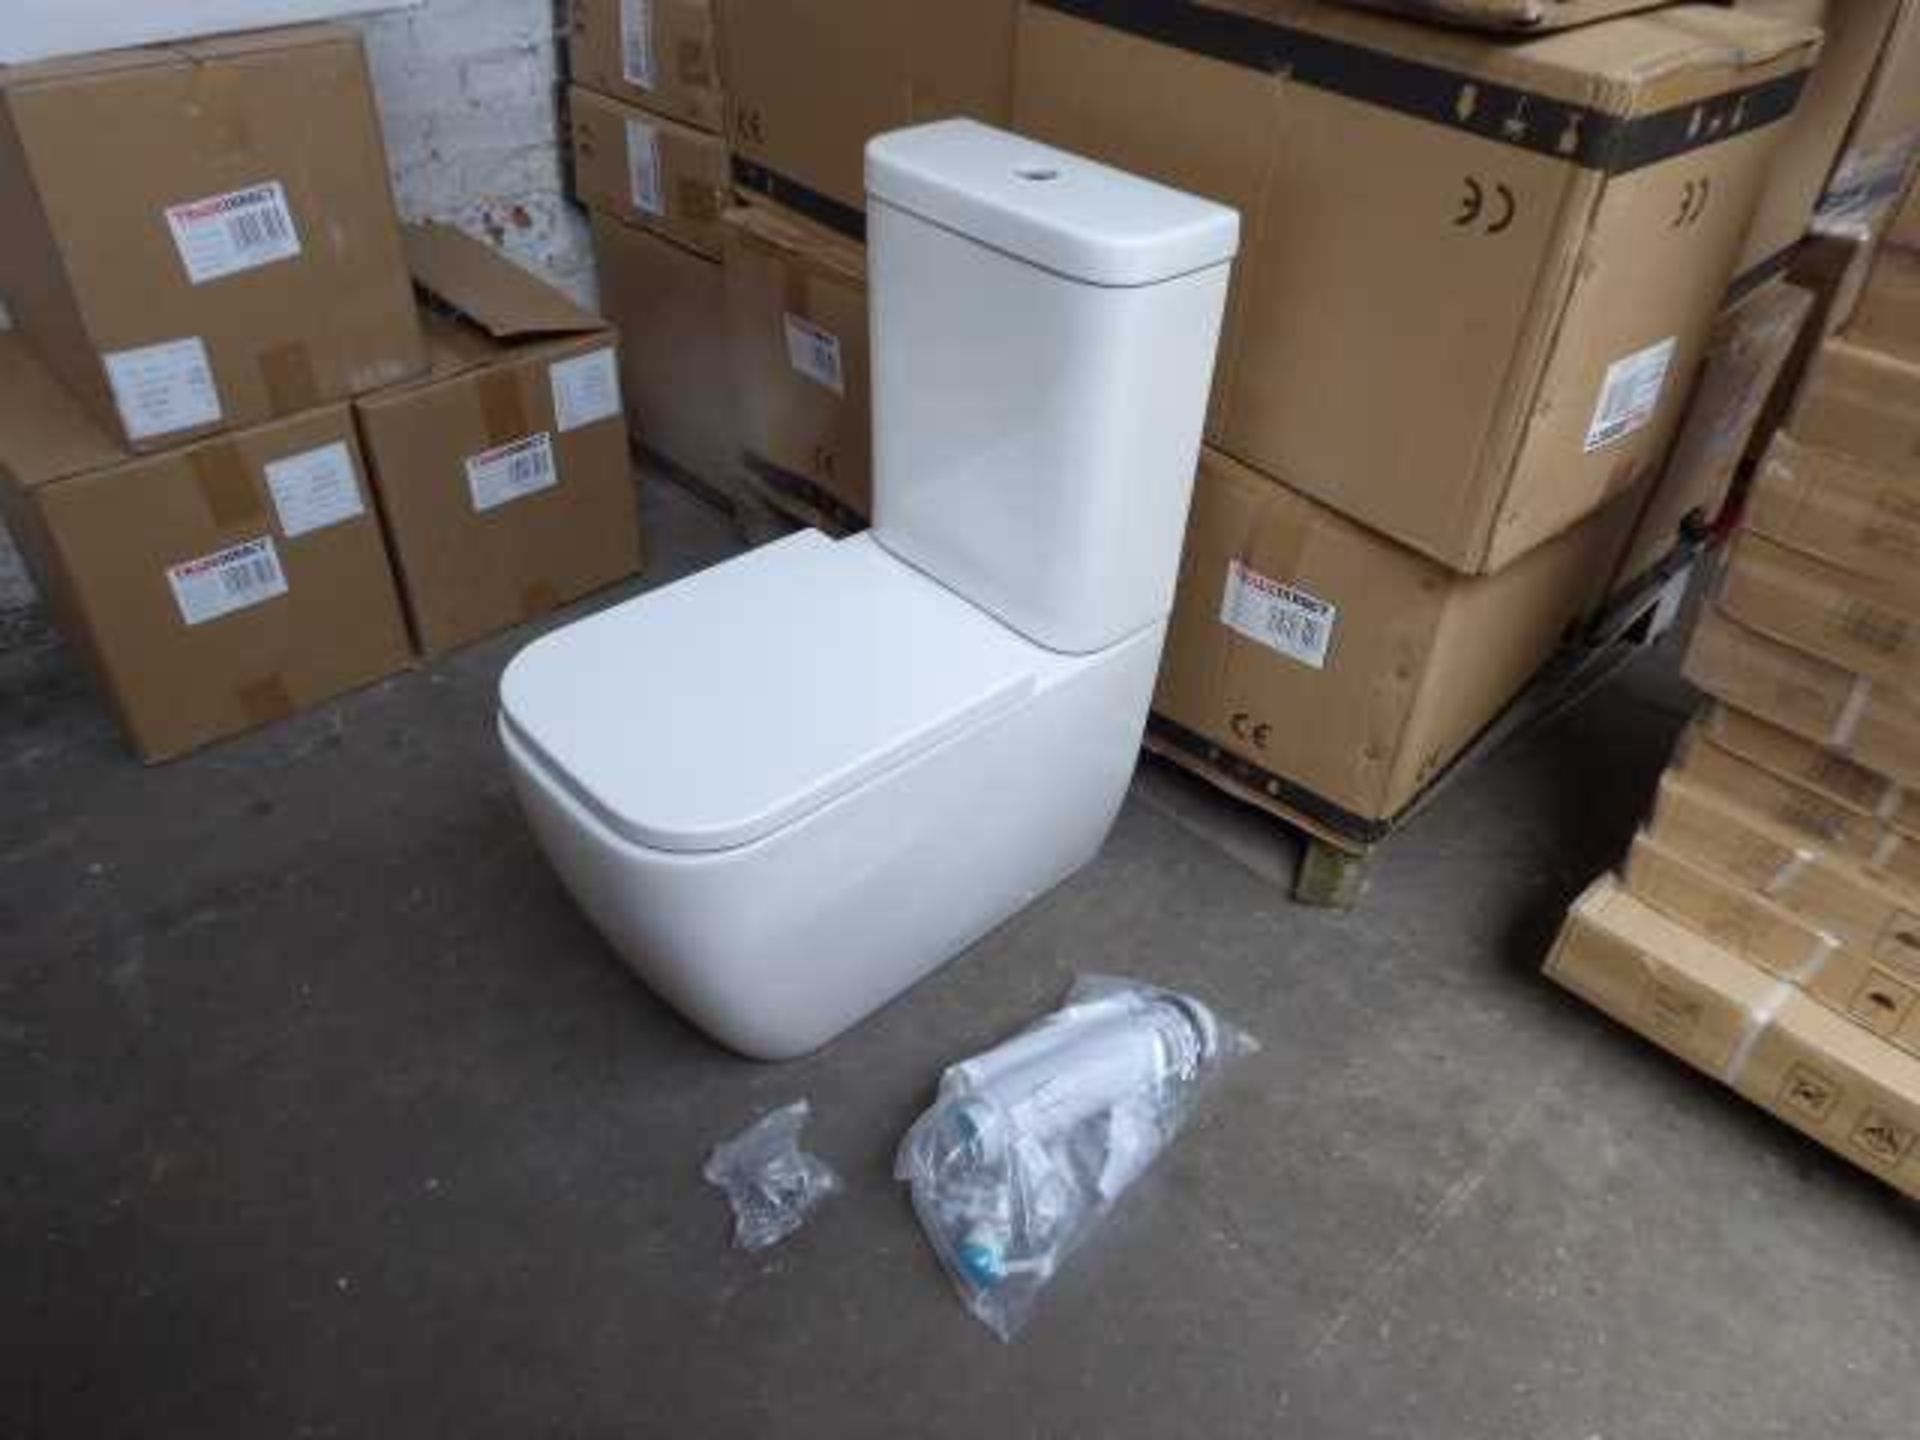 +VAT 12x PAC close coupled toilet bowls with fixings, matching cisterns and flush fittings, and slim